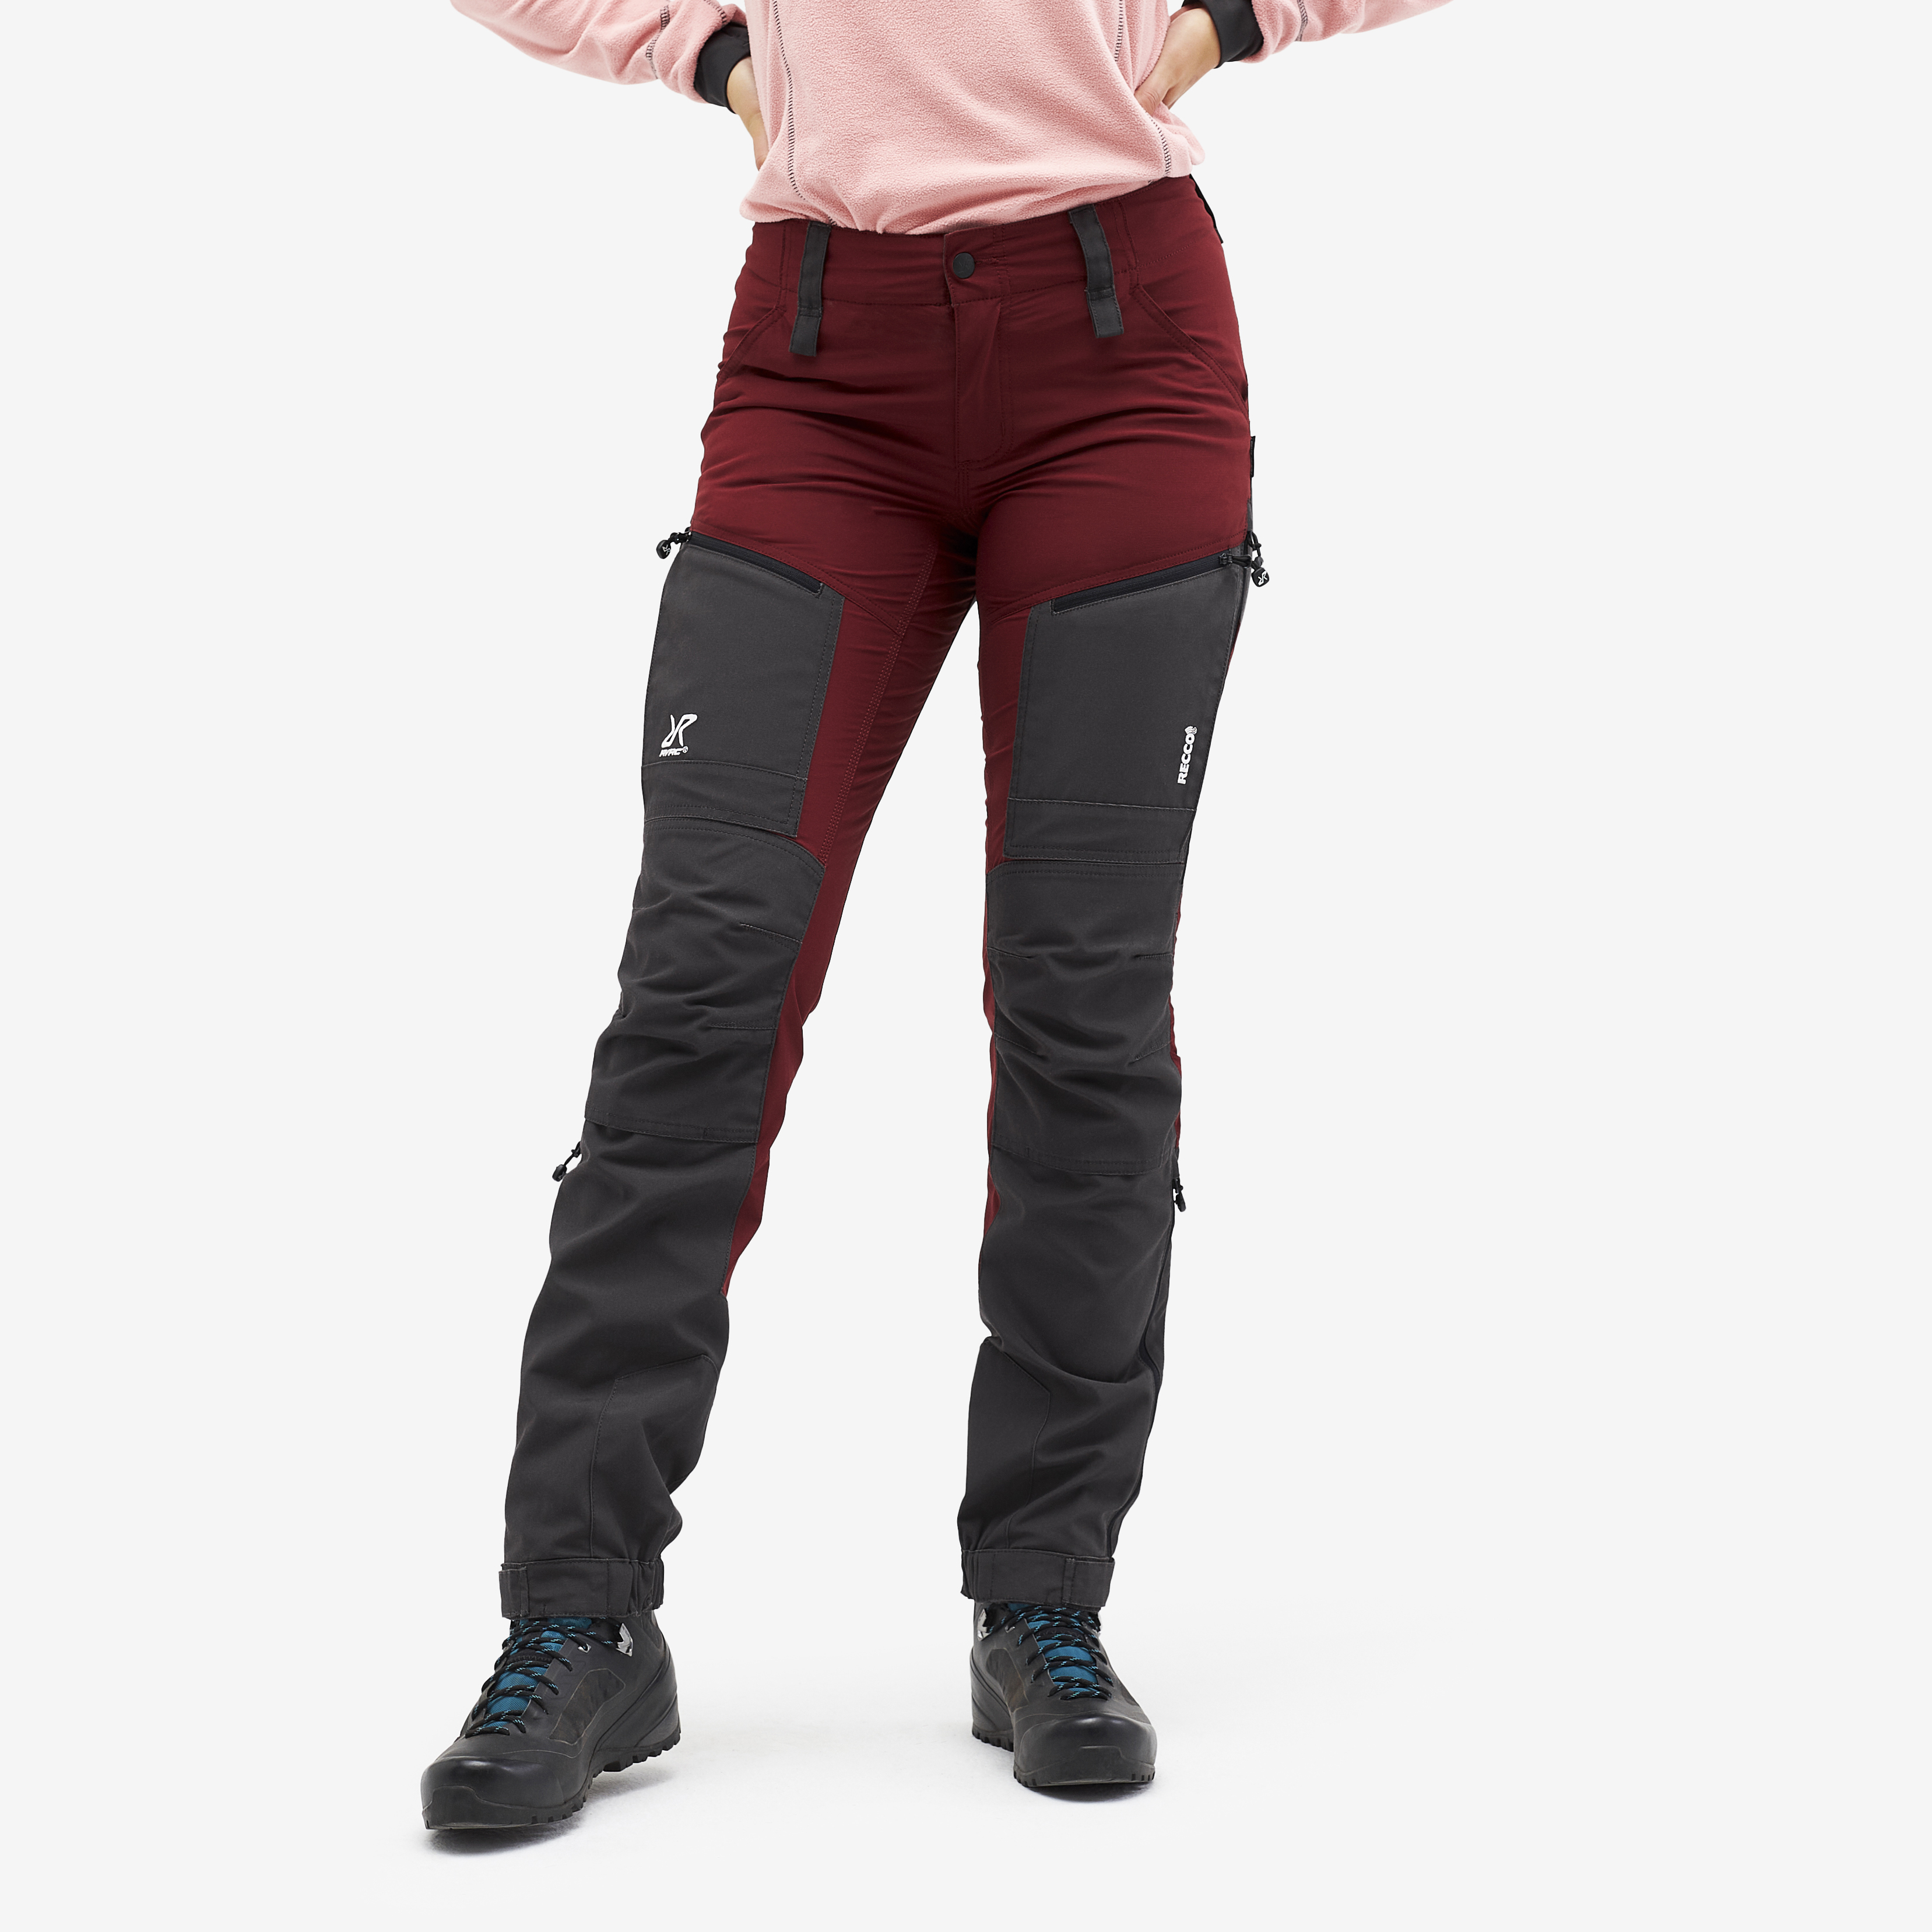 Nordwand walking trousers for women in dark red